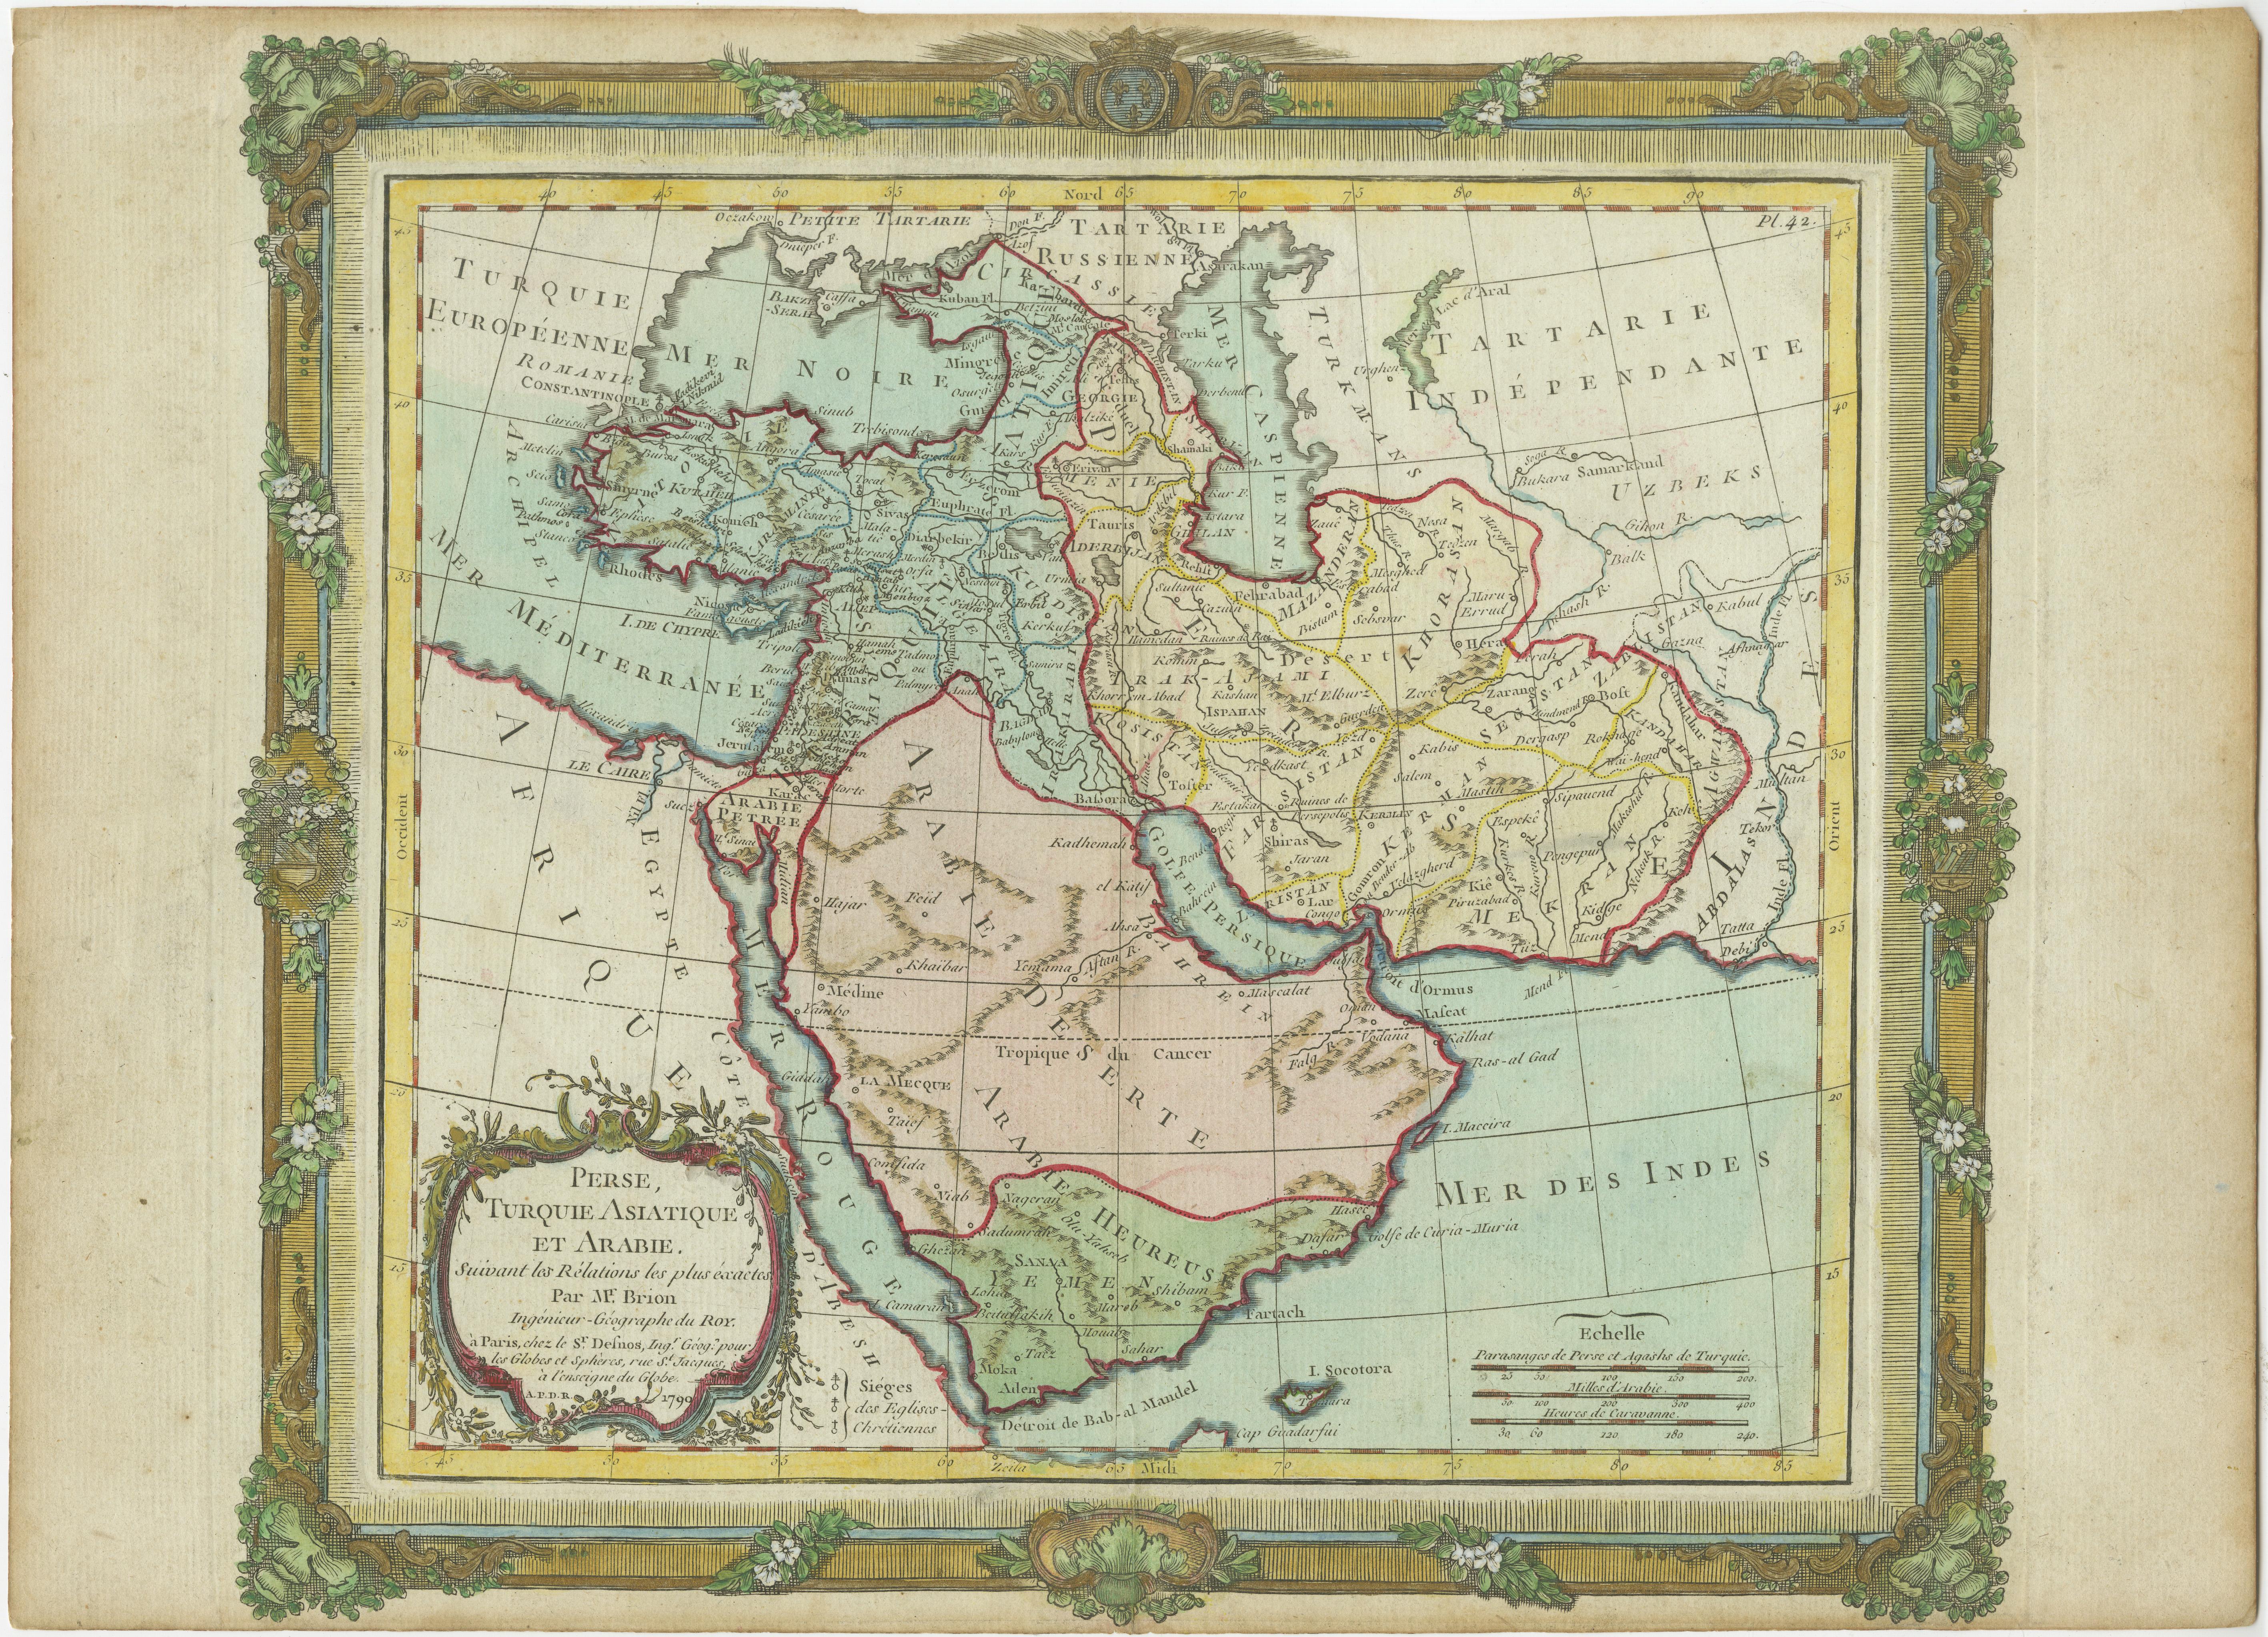 Antique map titled 'Perse, Turquie Asiatique et Arabie (..)'. Map of the Middle East with a large Arabia, extending from the Black Sea to the Indian Ocean and from the Red Sea to Persia and Iraq. Small but decorative cartouche and a very elaborate